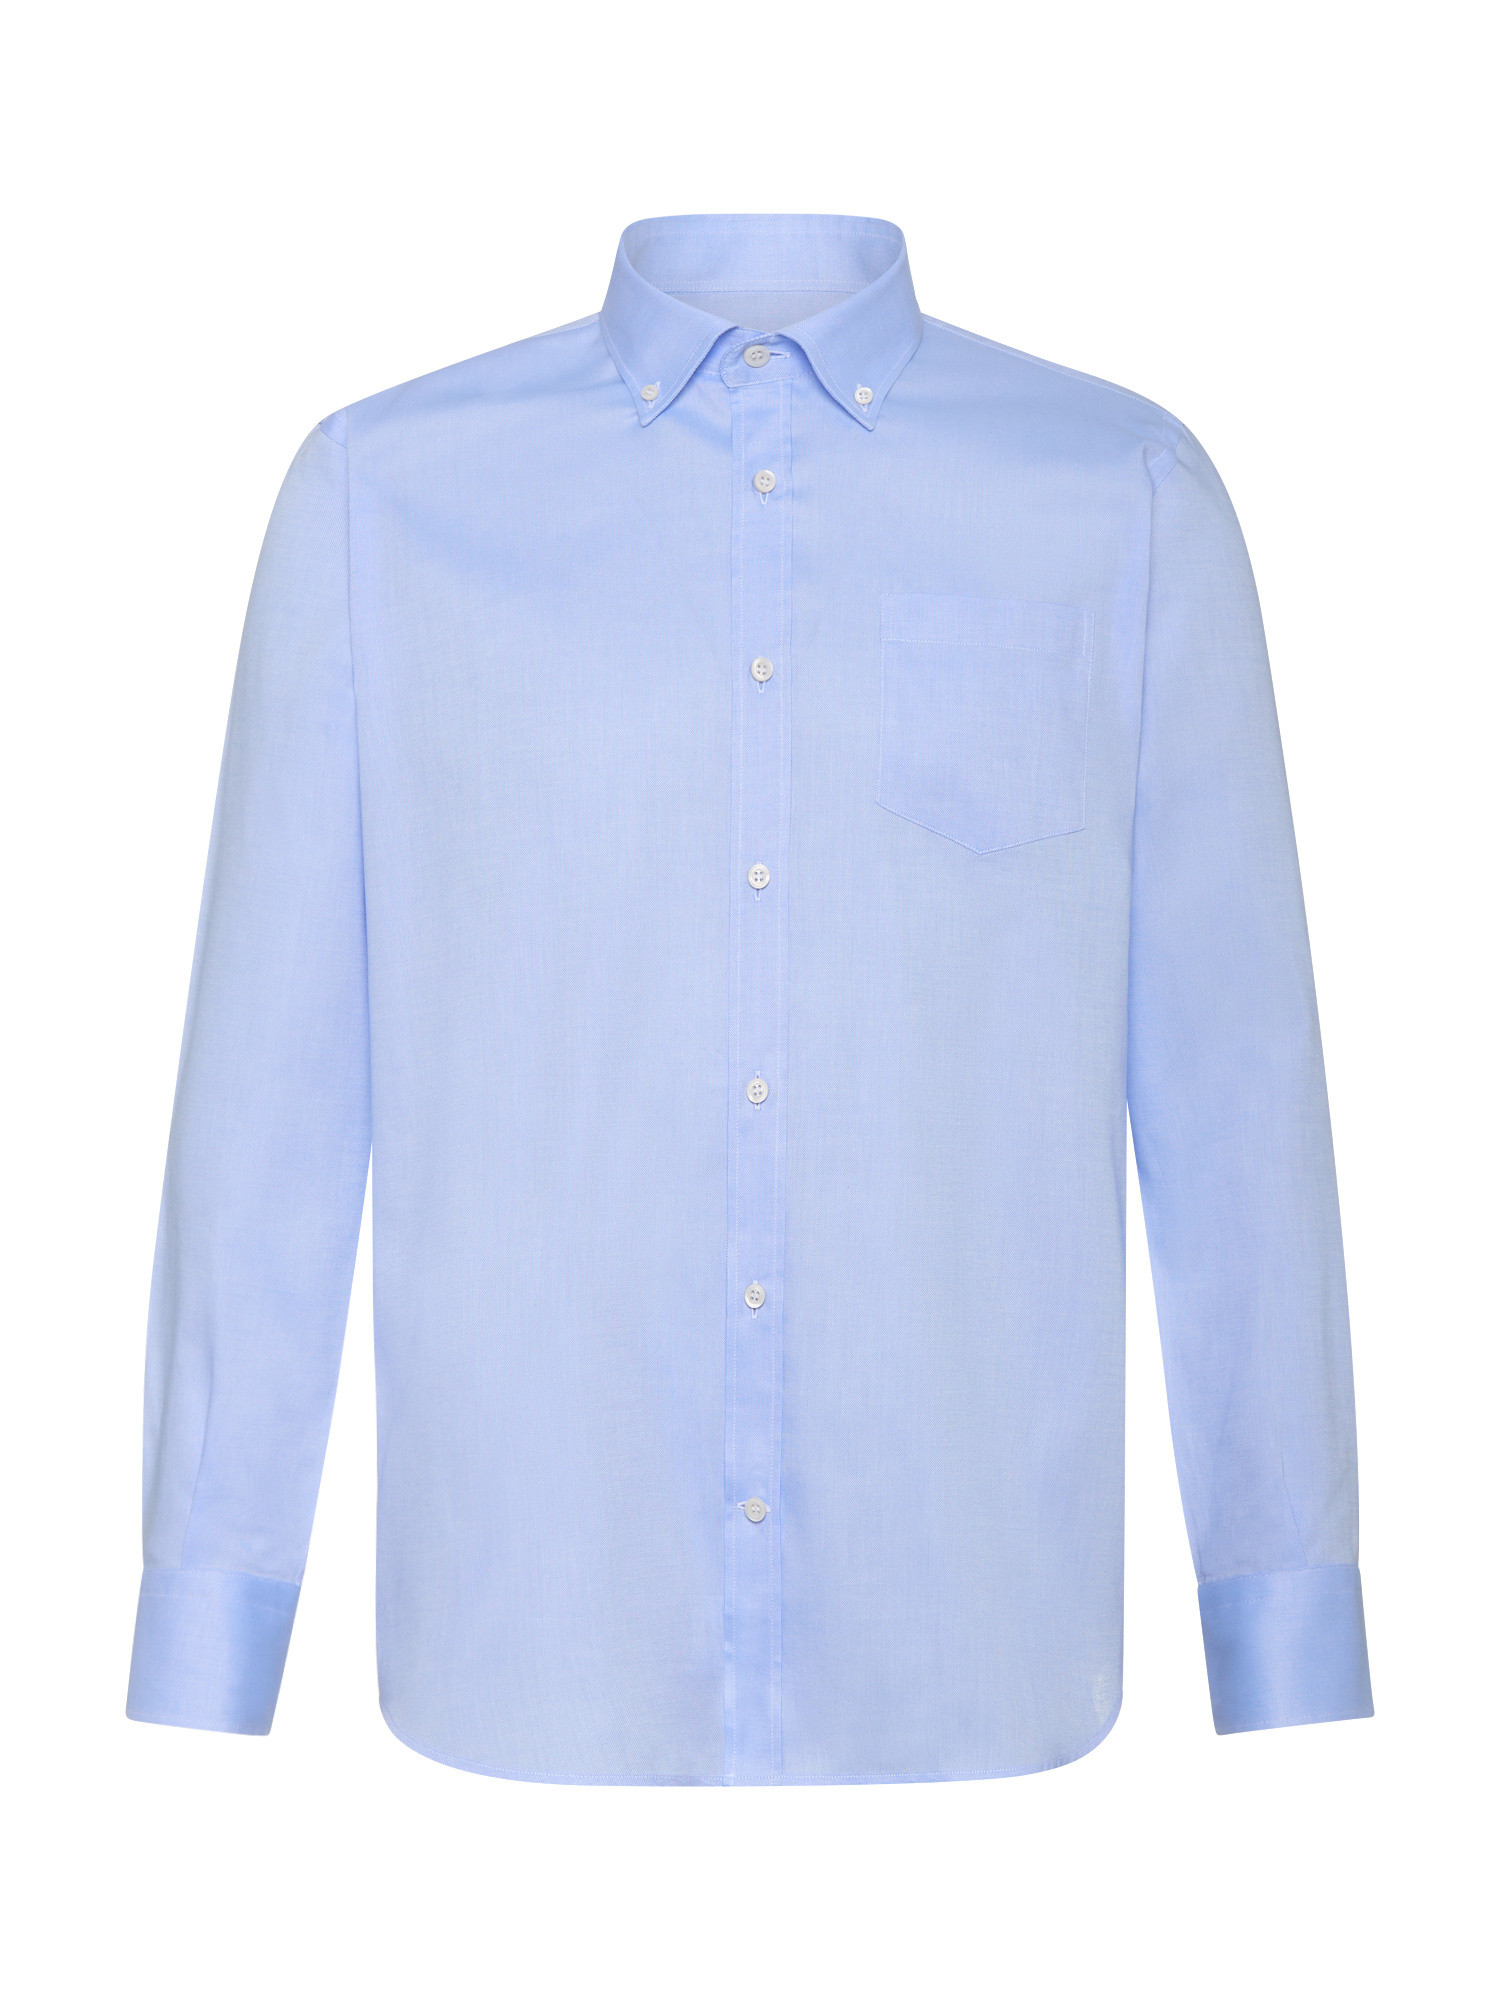 Luca D'Altieri - Regular fit casual shirt in pure cotton oxford, Light Blue, large image number 1